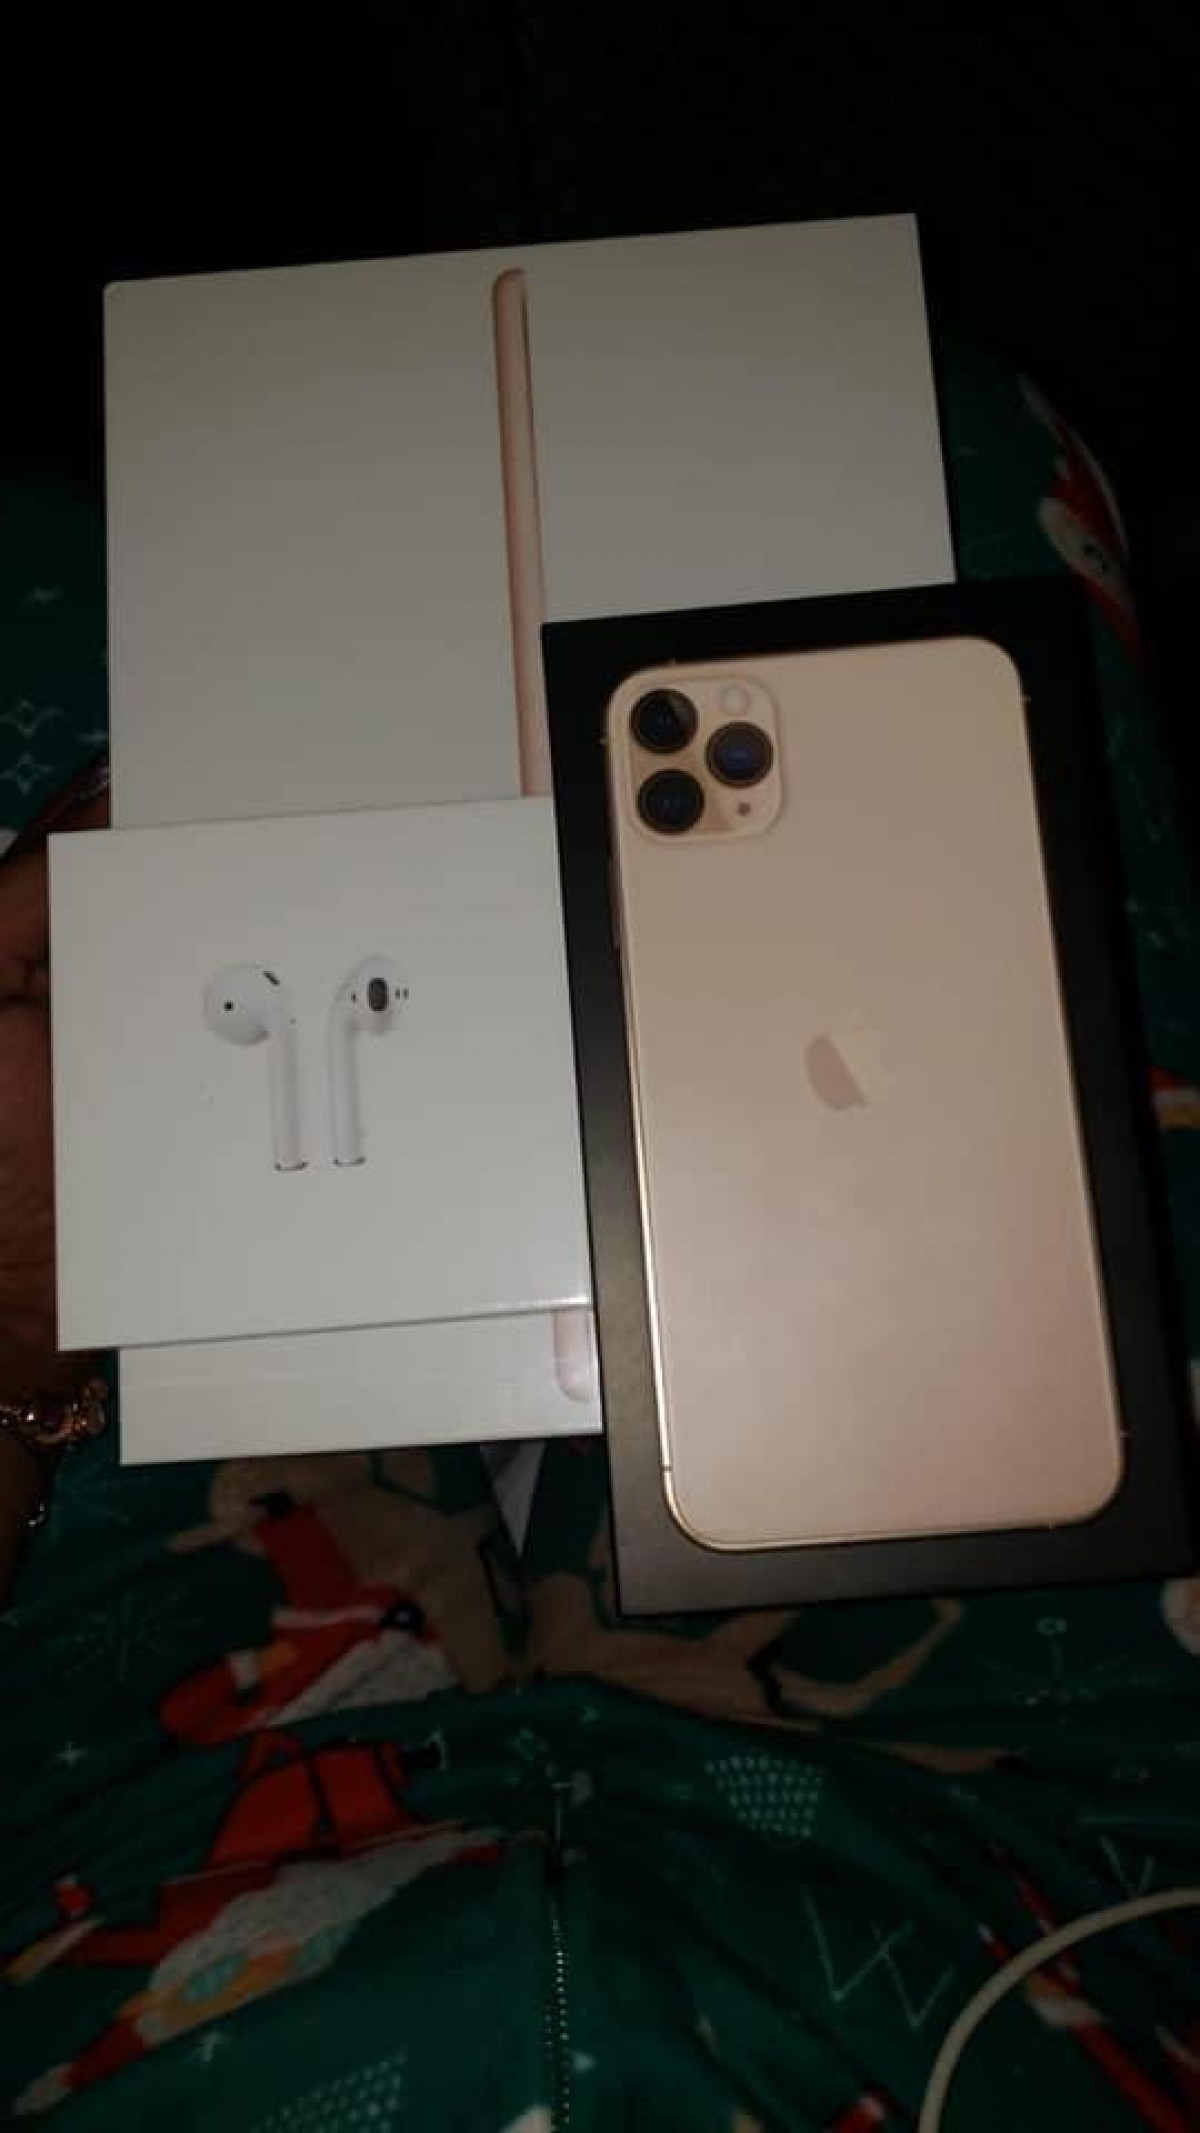 IPhone 11 Pro Max for sale in Portmore St Catherine - Phones